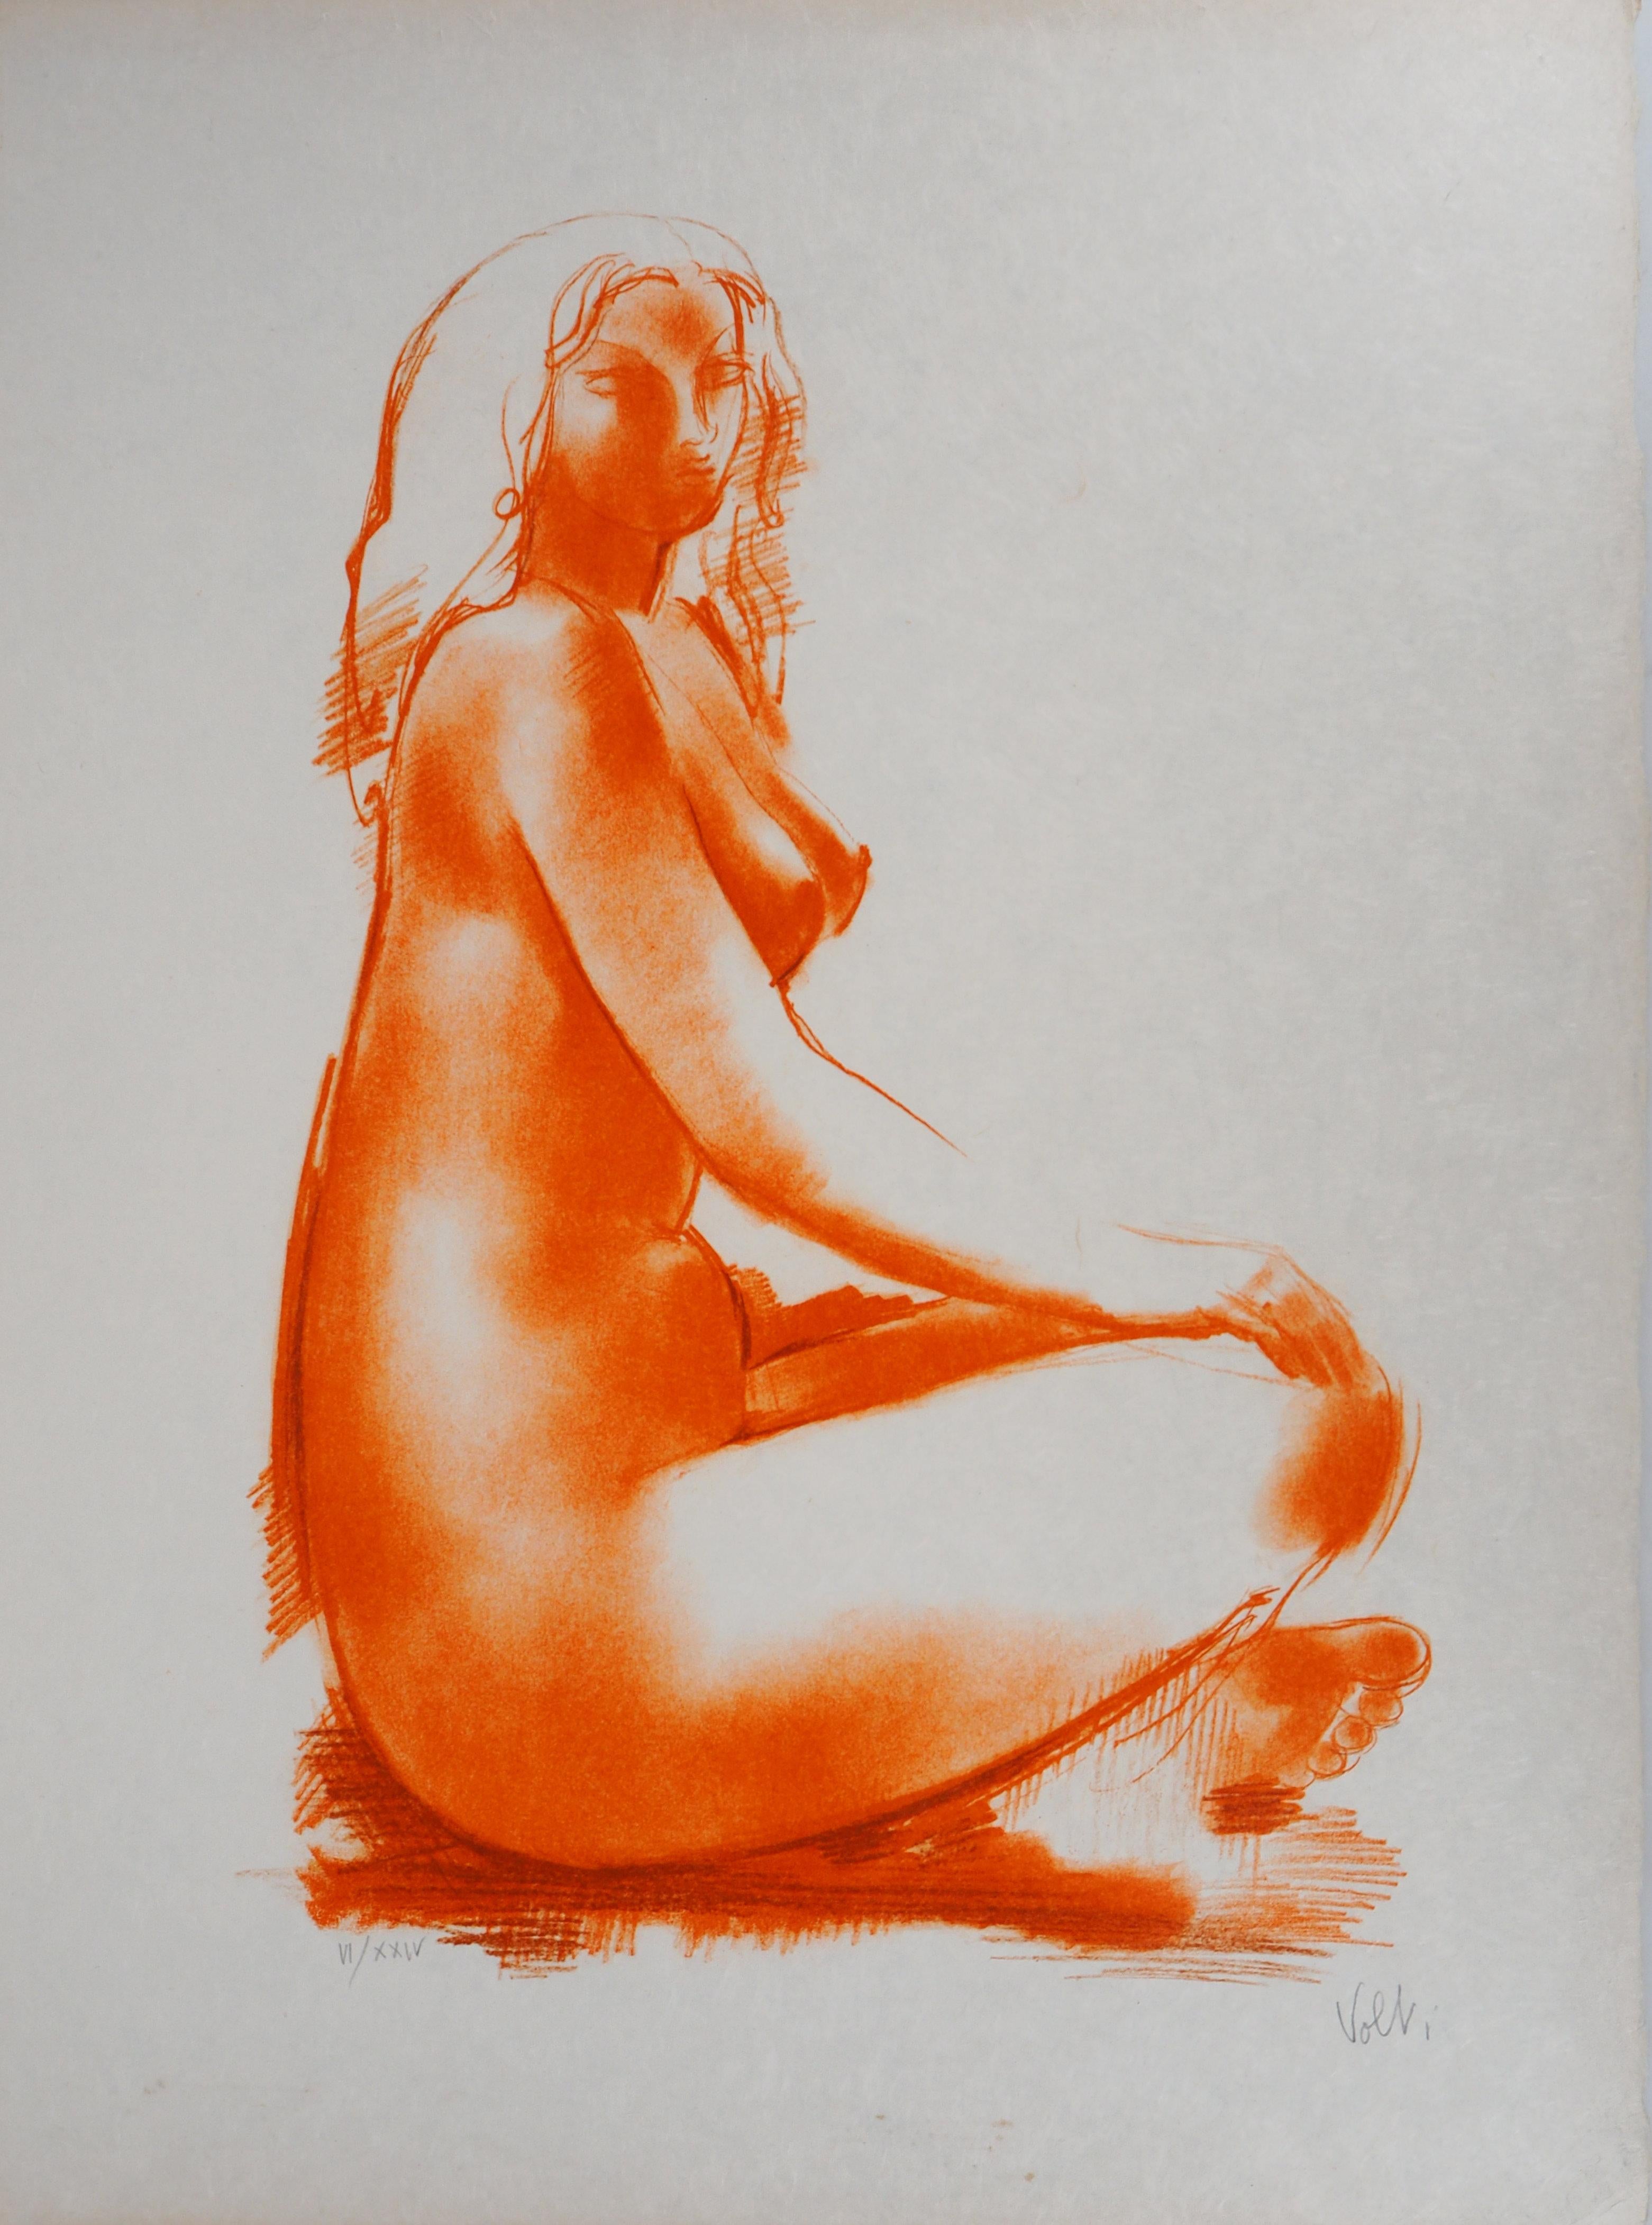 Antoniucci Volti Nude Print - Seated Model - Original Signed Lithograph, Numbered / 24